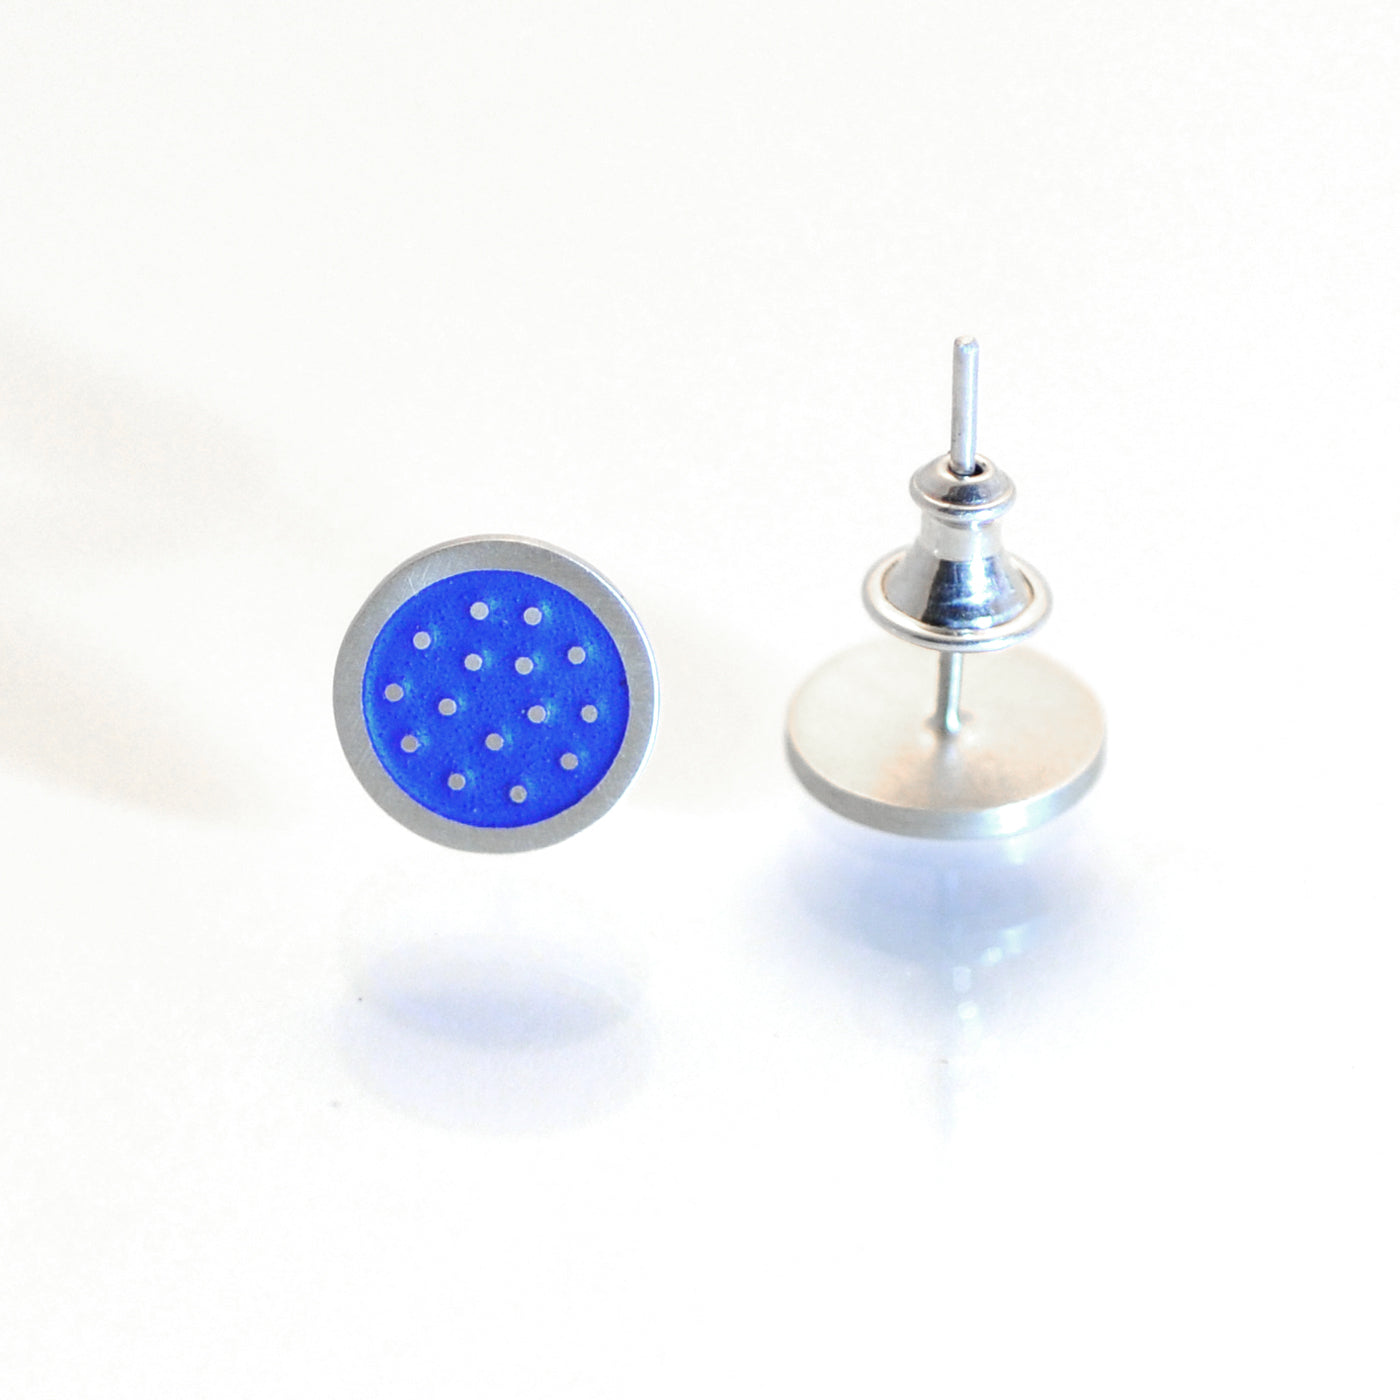 Dotty silver and enamelled earrings, mid-blue